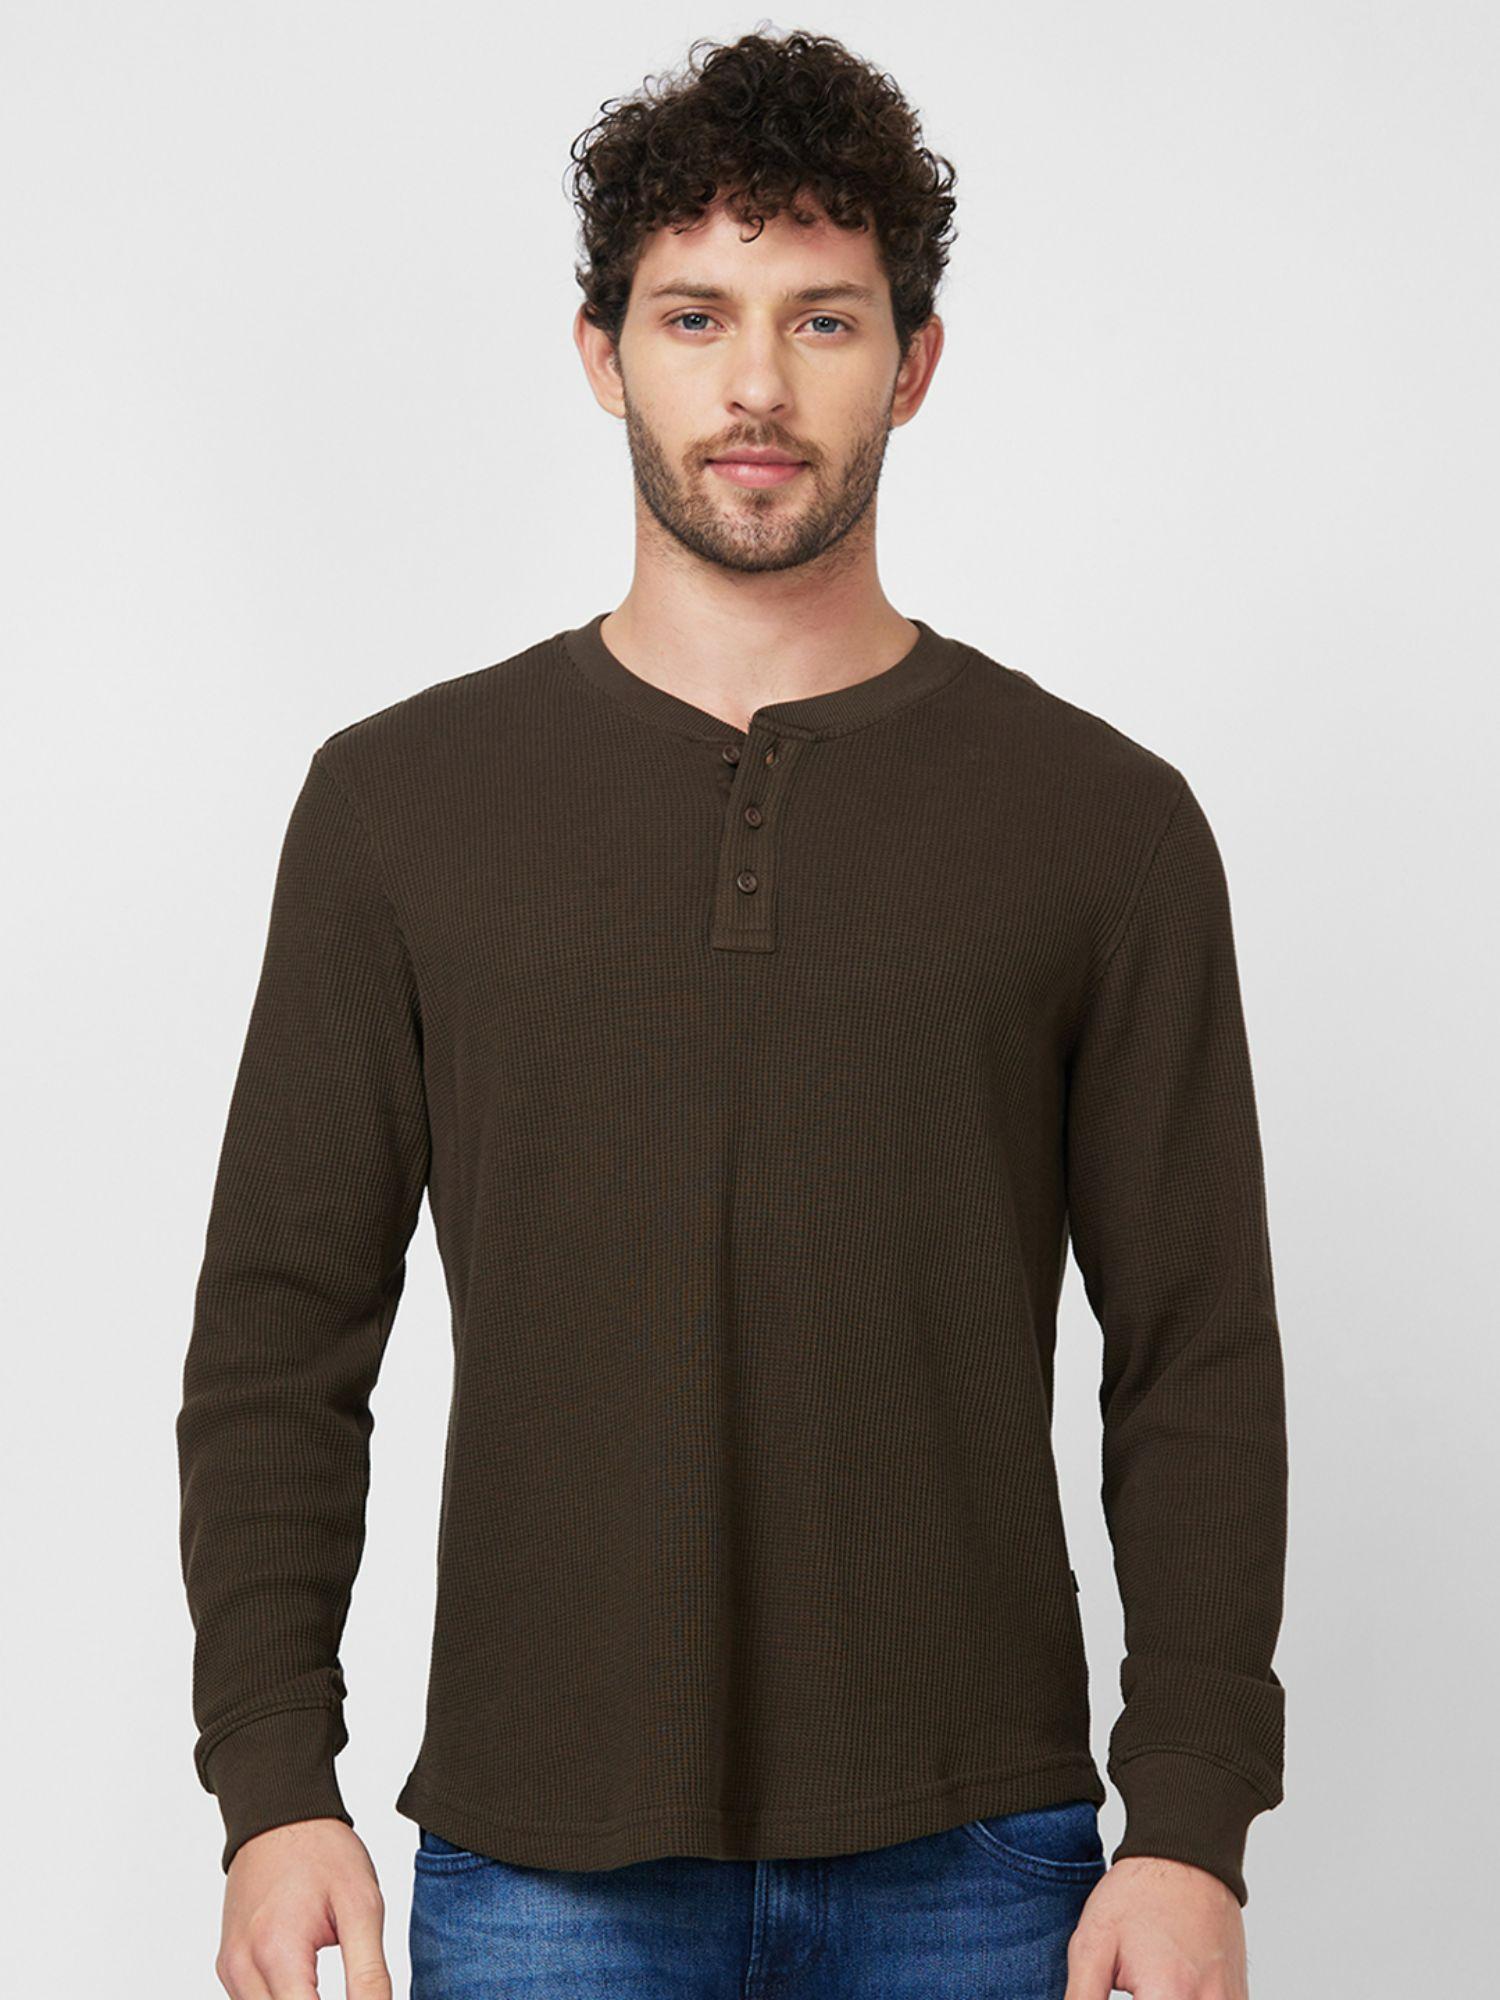 henley neck full sleeve brown solid t-shirt